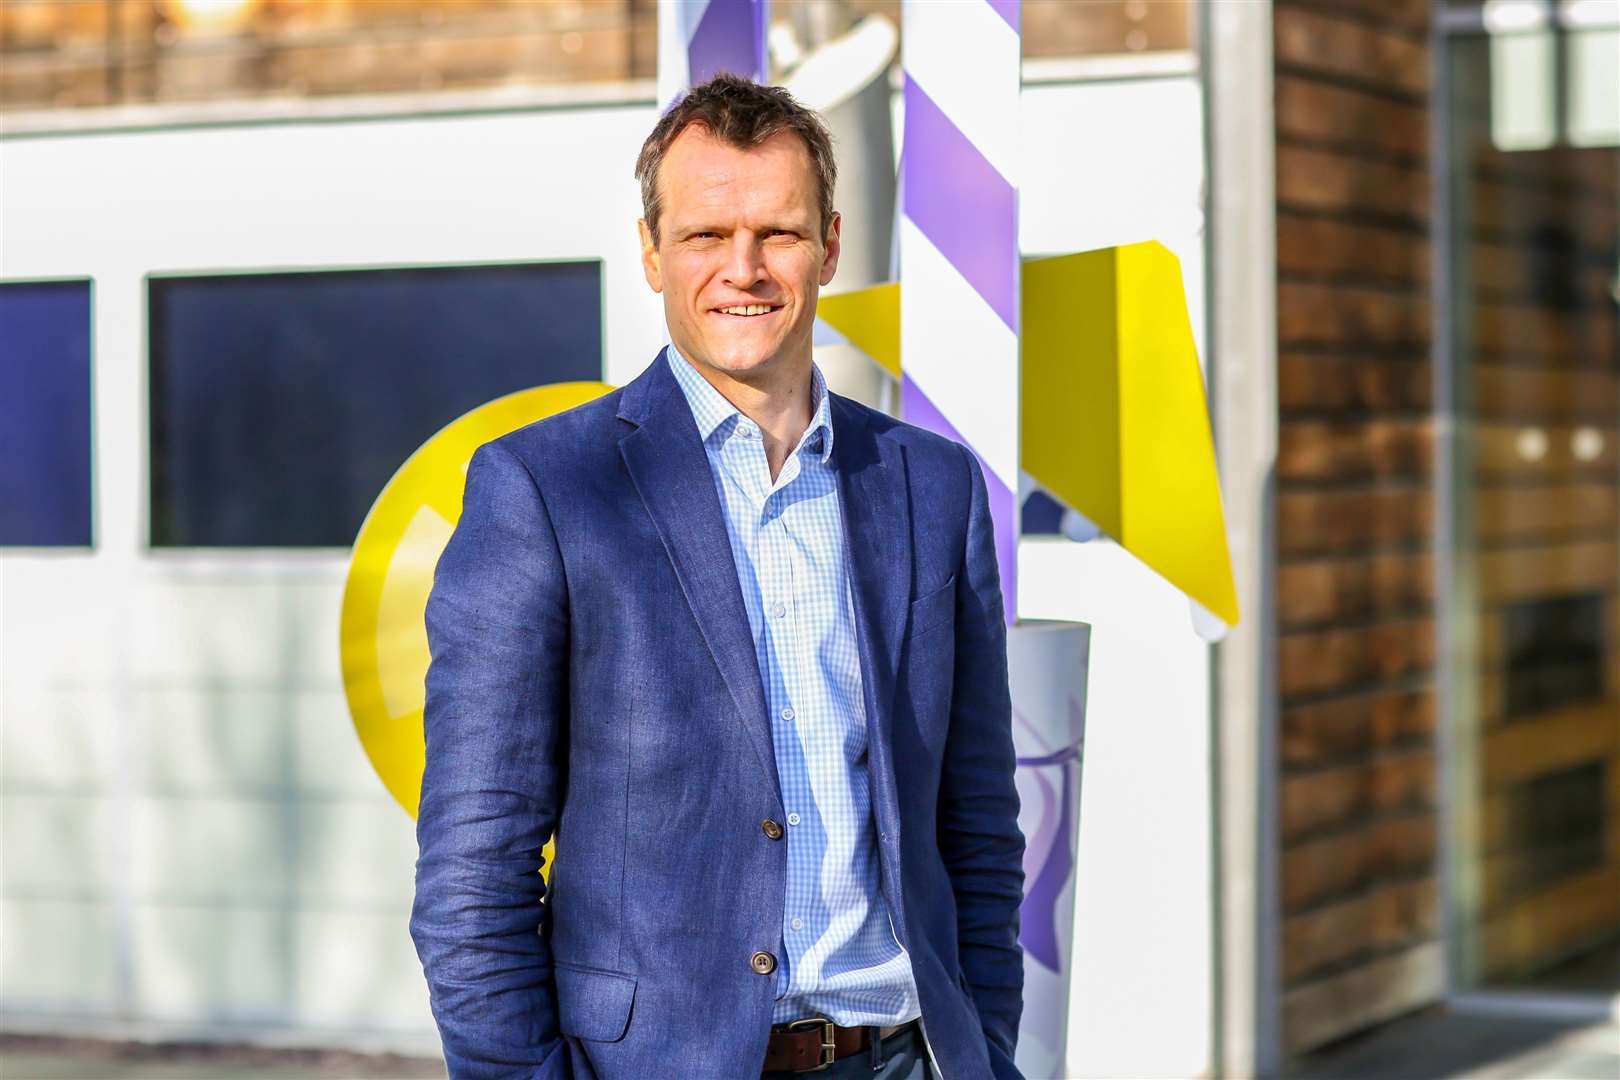 Hugo Loudon has joined Holiday Extras as CFO